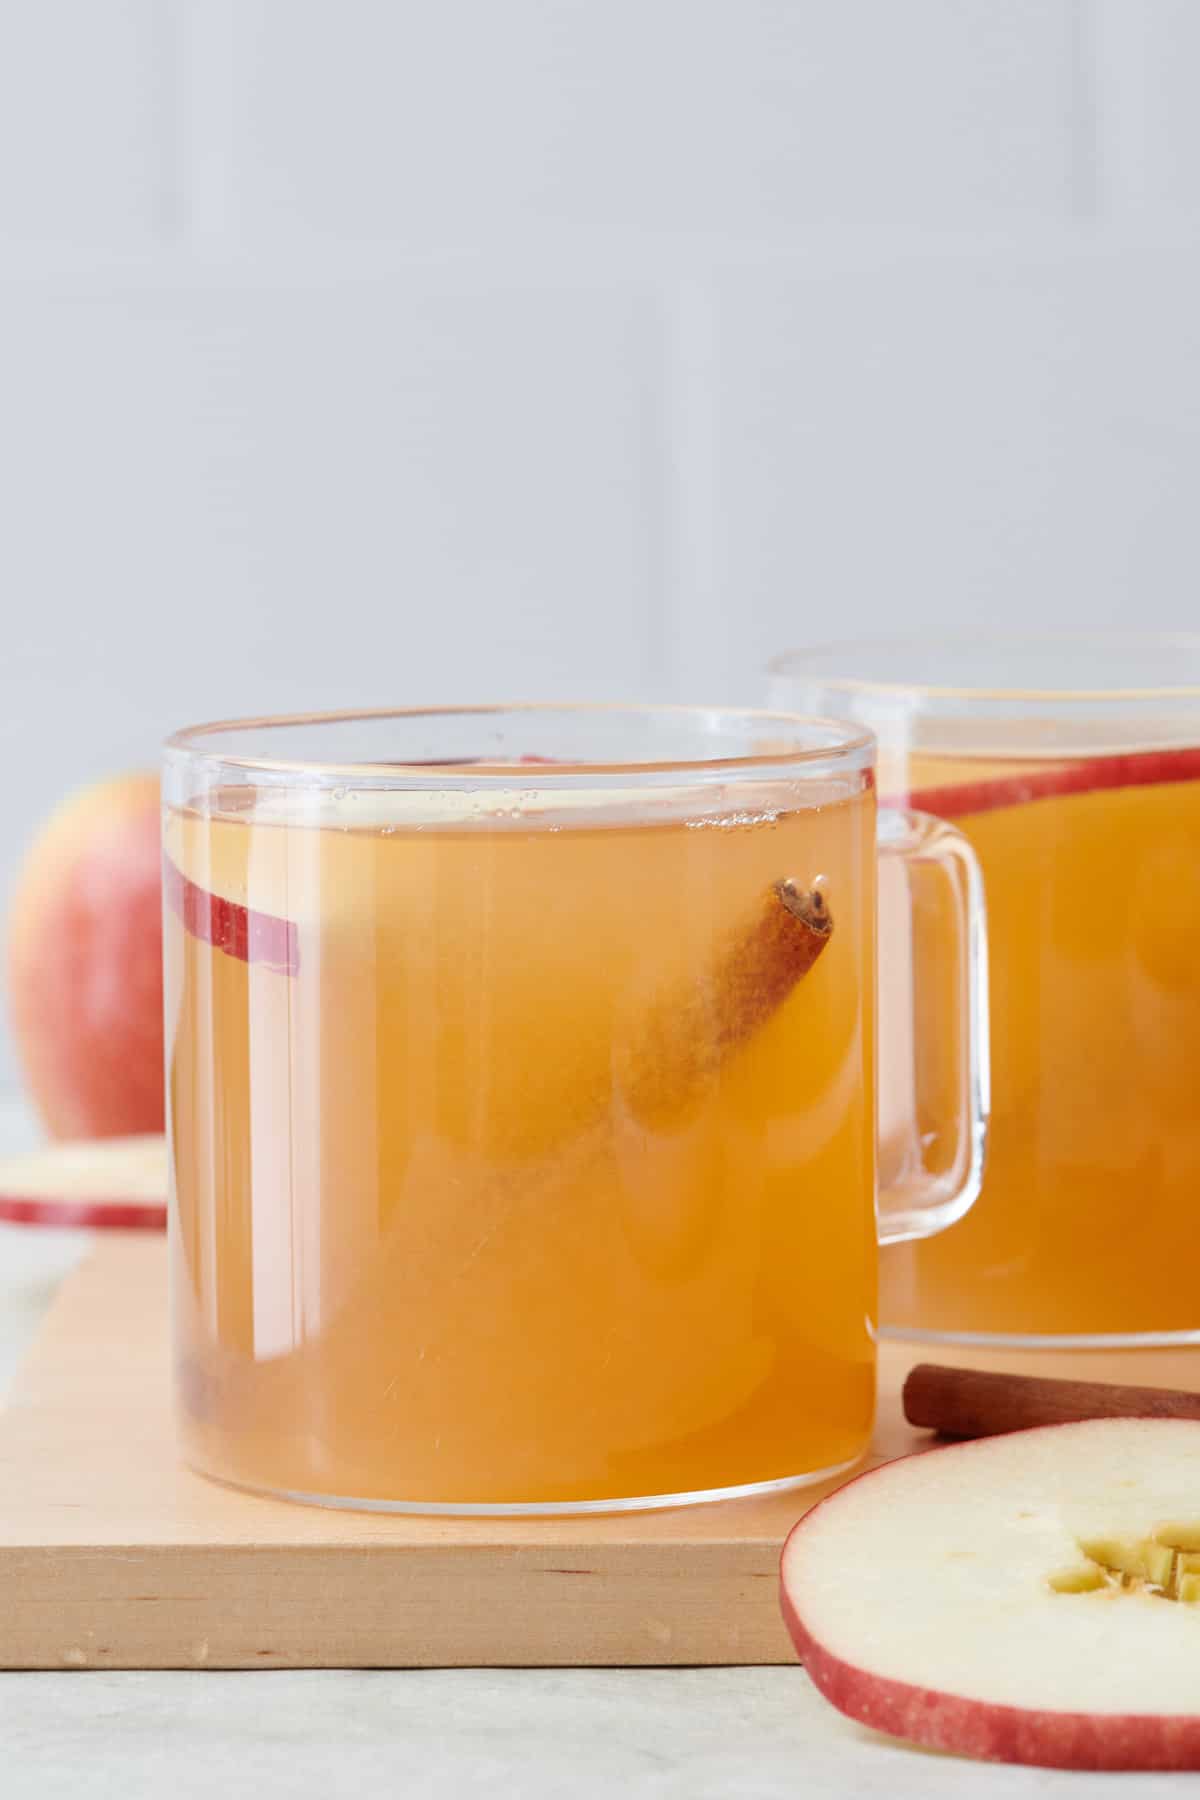 Homemade apple cider in a glass mug with a cinnamon stick and apple slice.